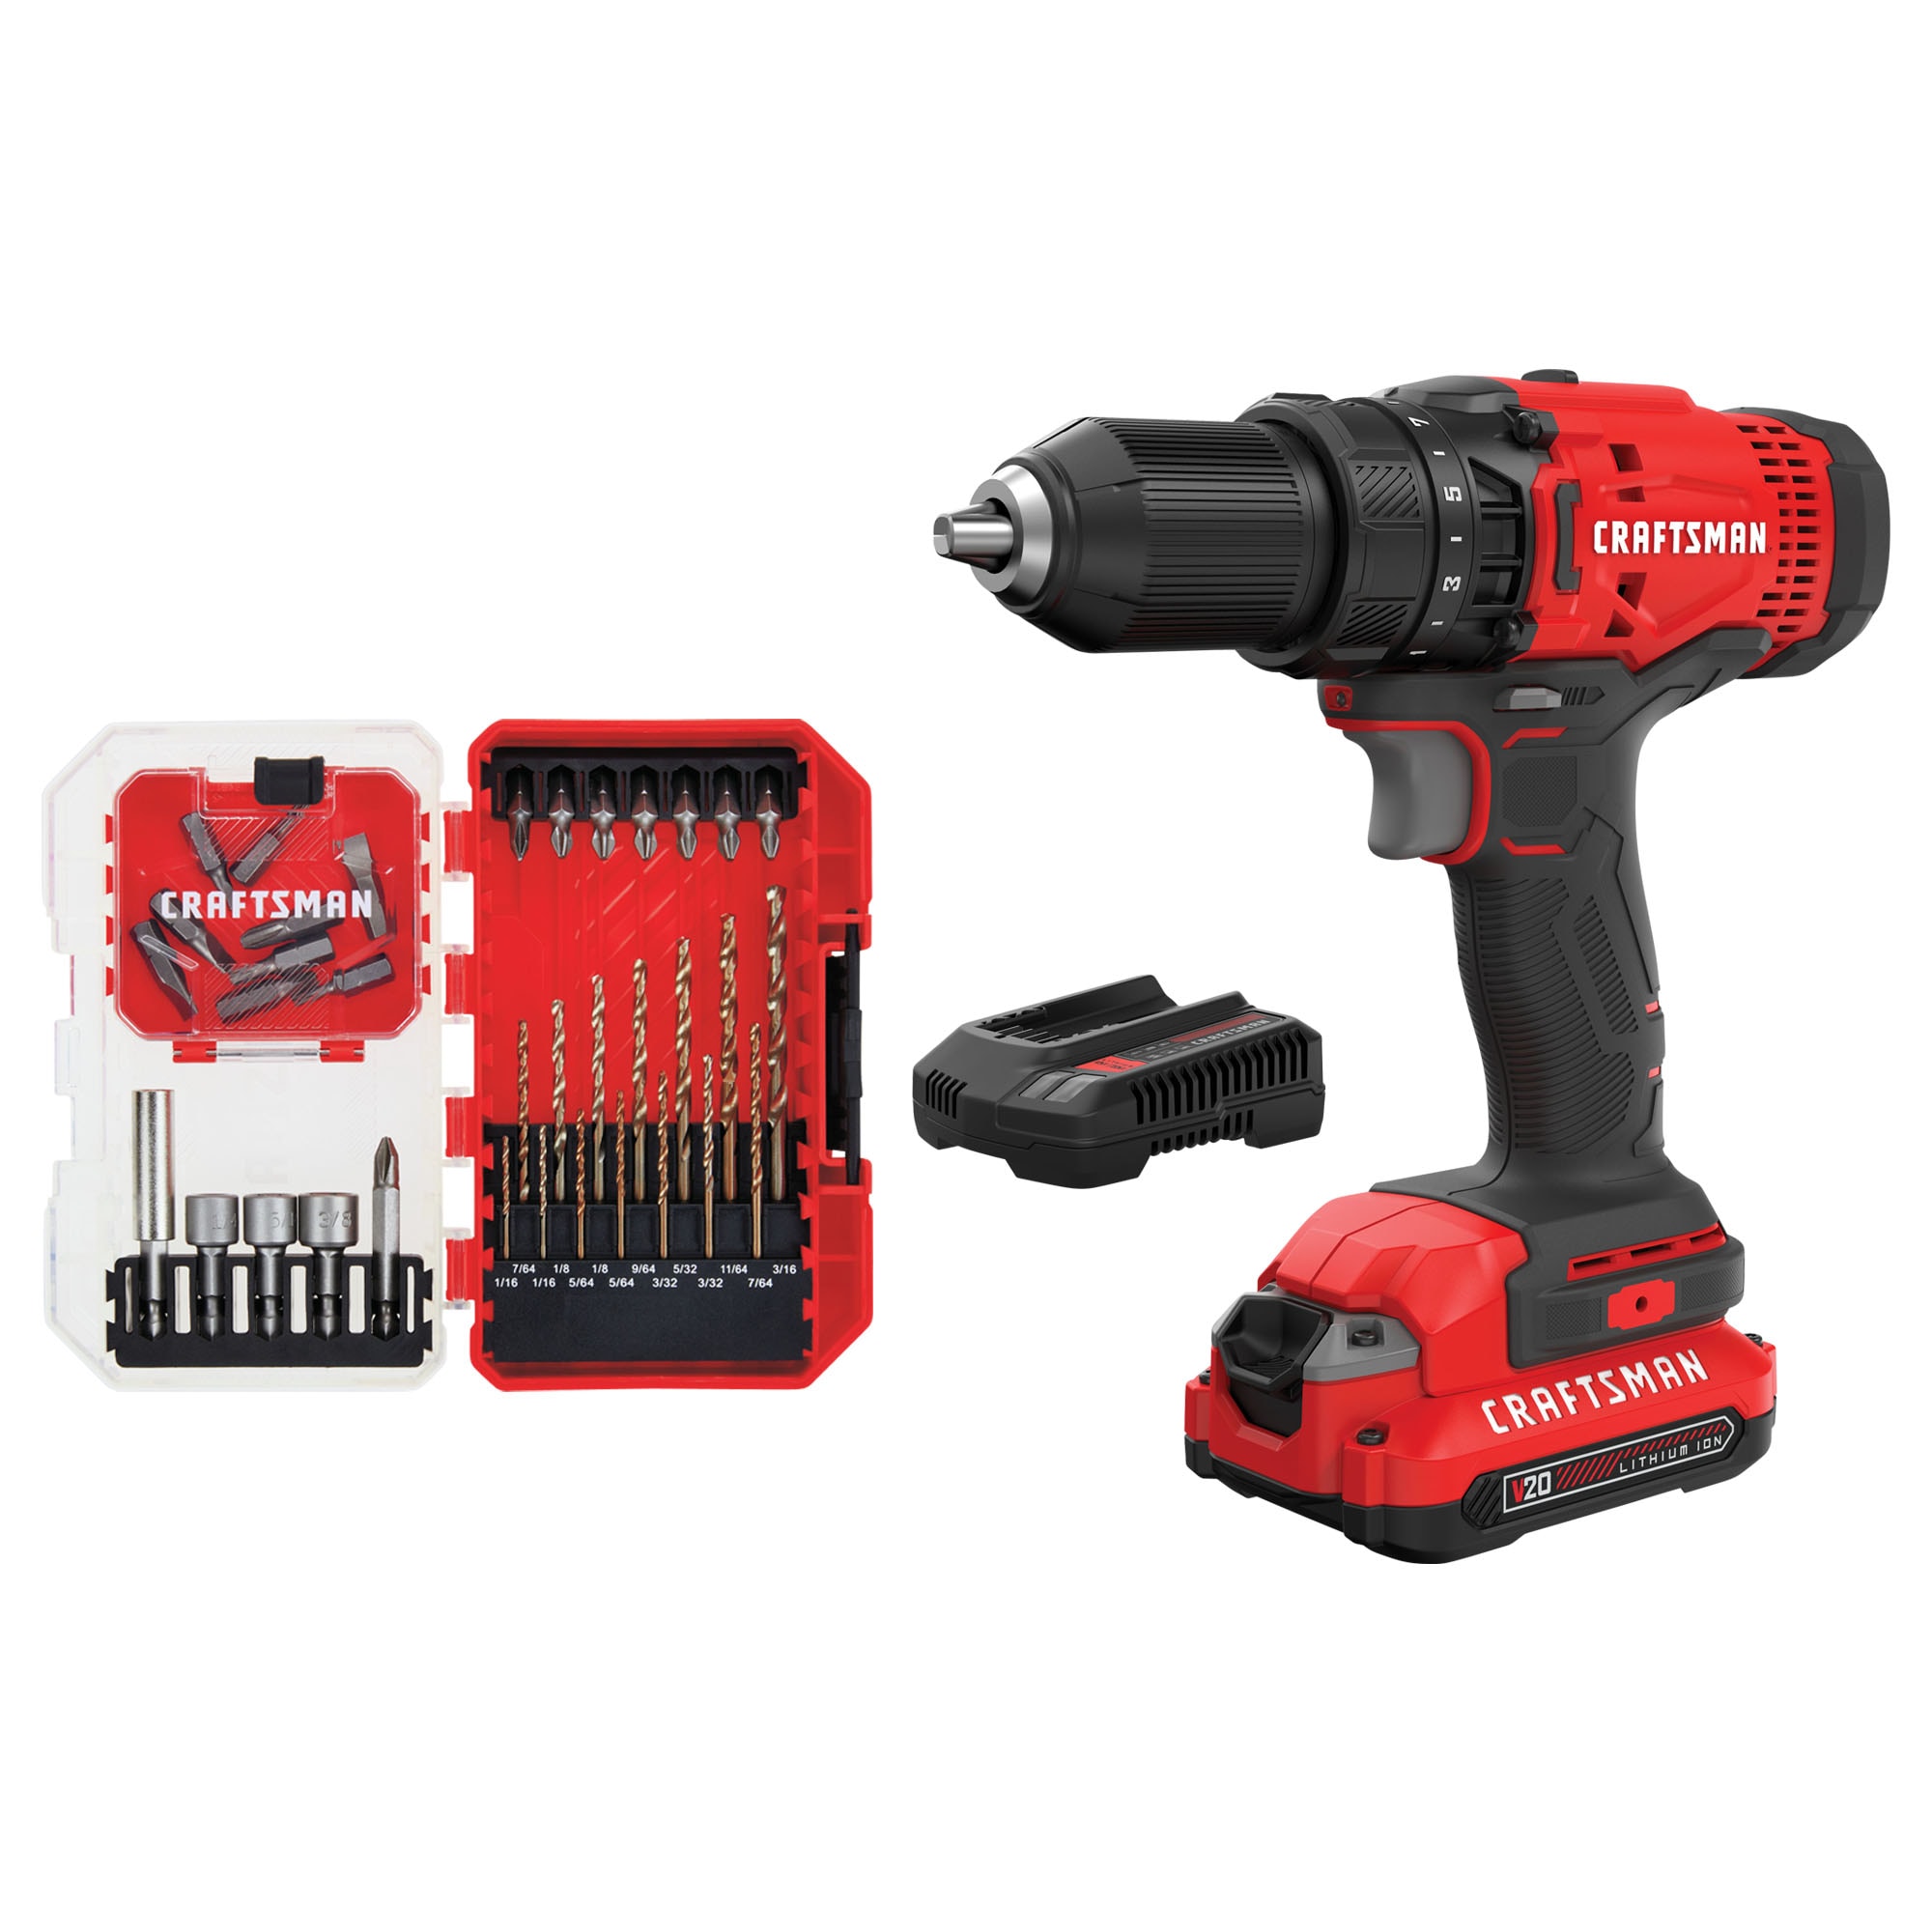 CRAFTSMAN V20 20-volt Max 1/2-in Cordless Drill (1-Battery Included and Charger Included) & Screwdriver Bit Set Drill/Driver (35-Piece)